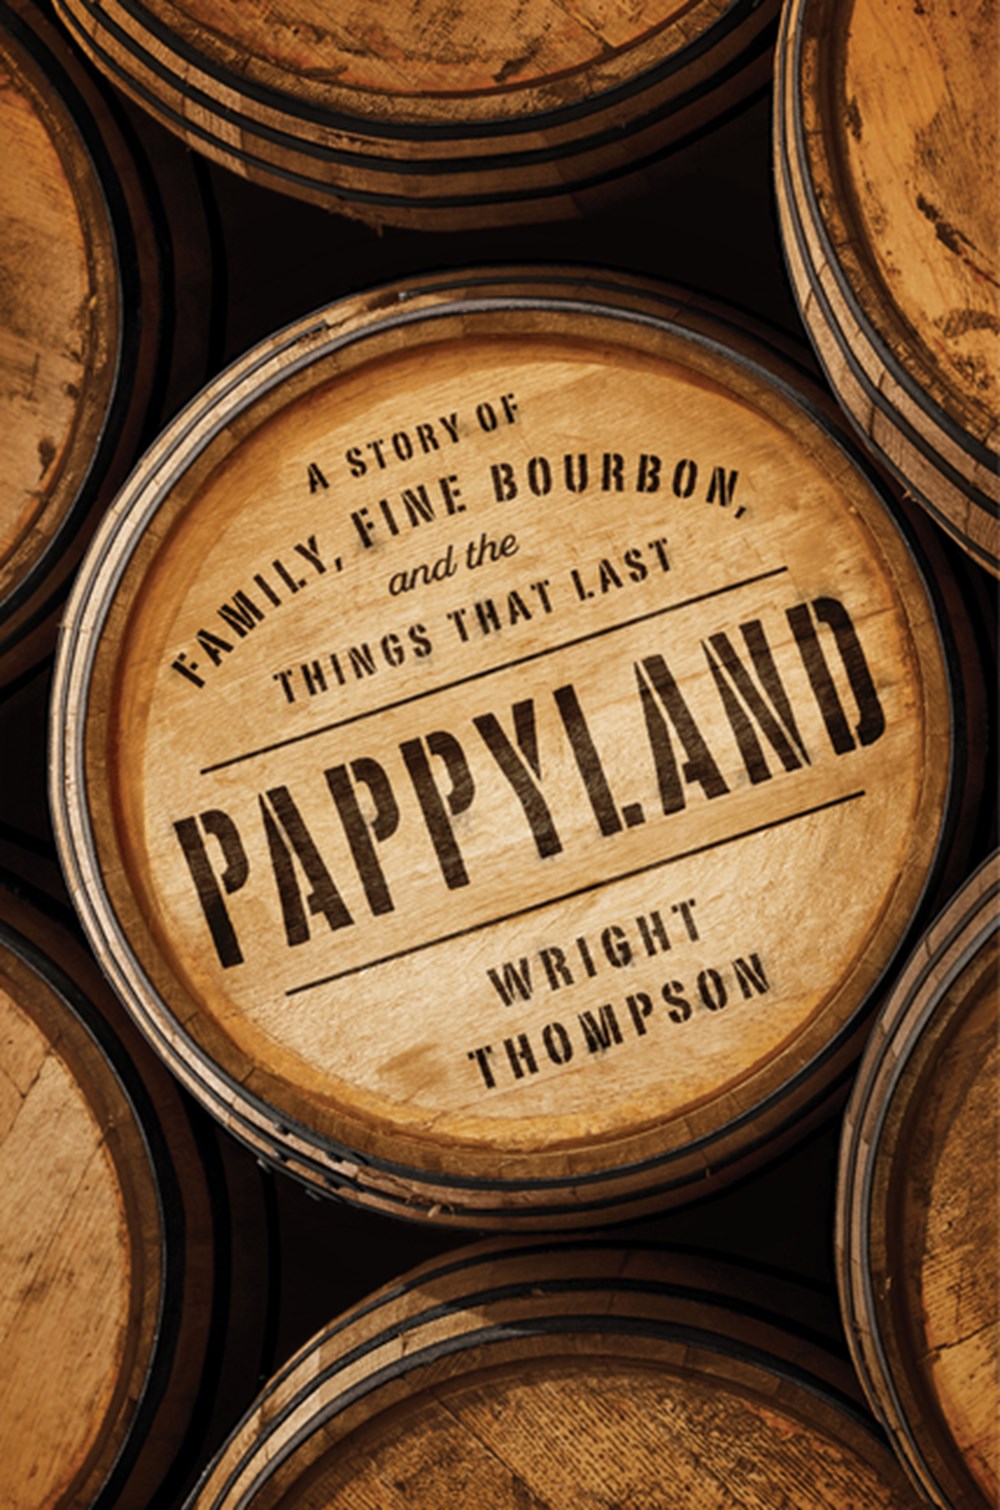 Pappyland A Story of Family, Fine Bourbon, and the Things That Last